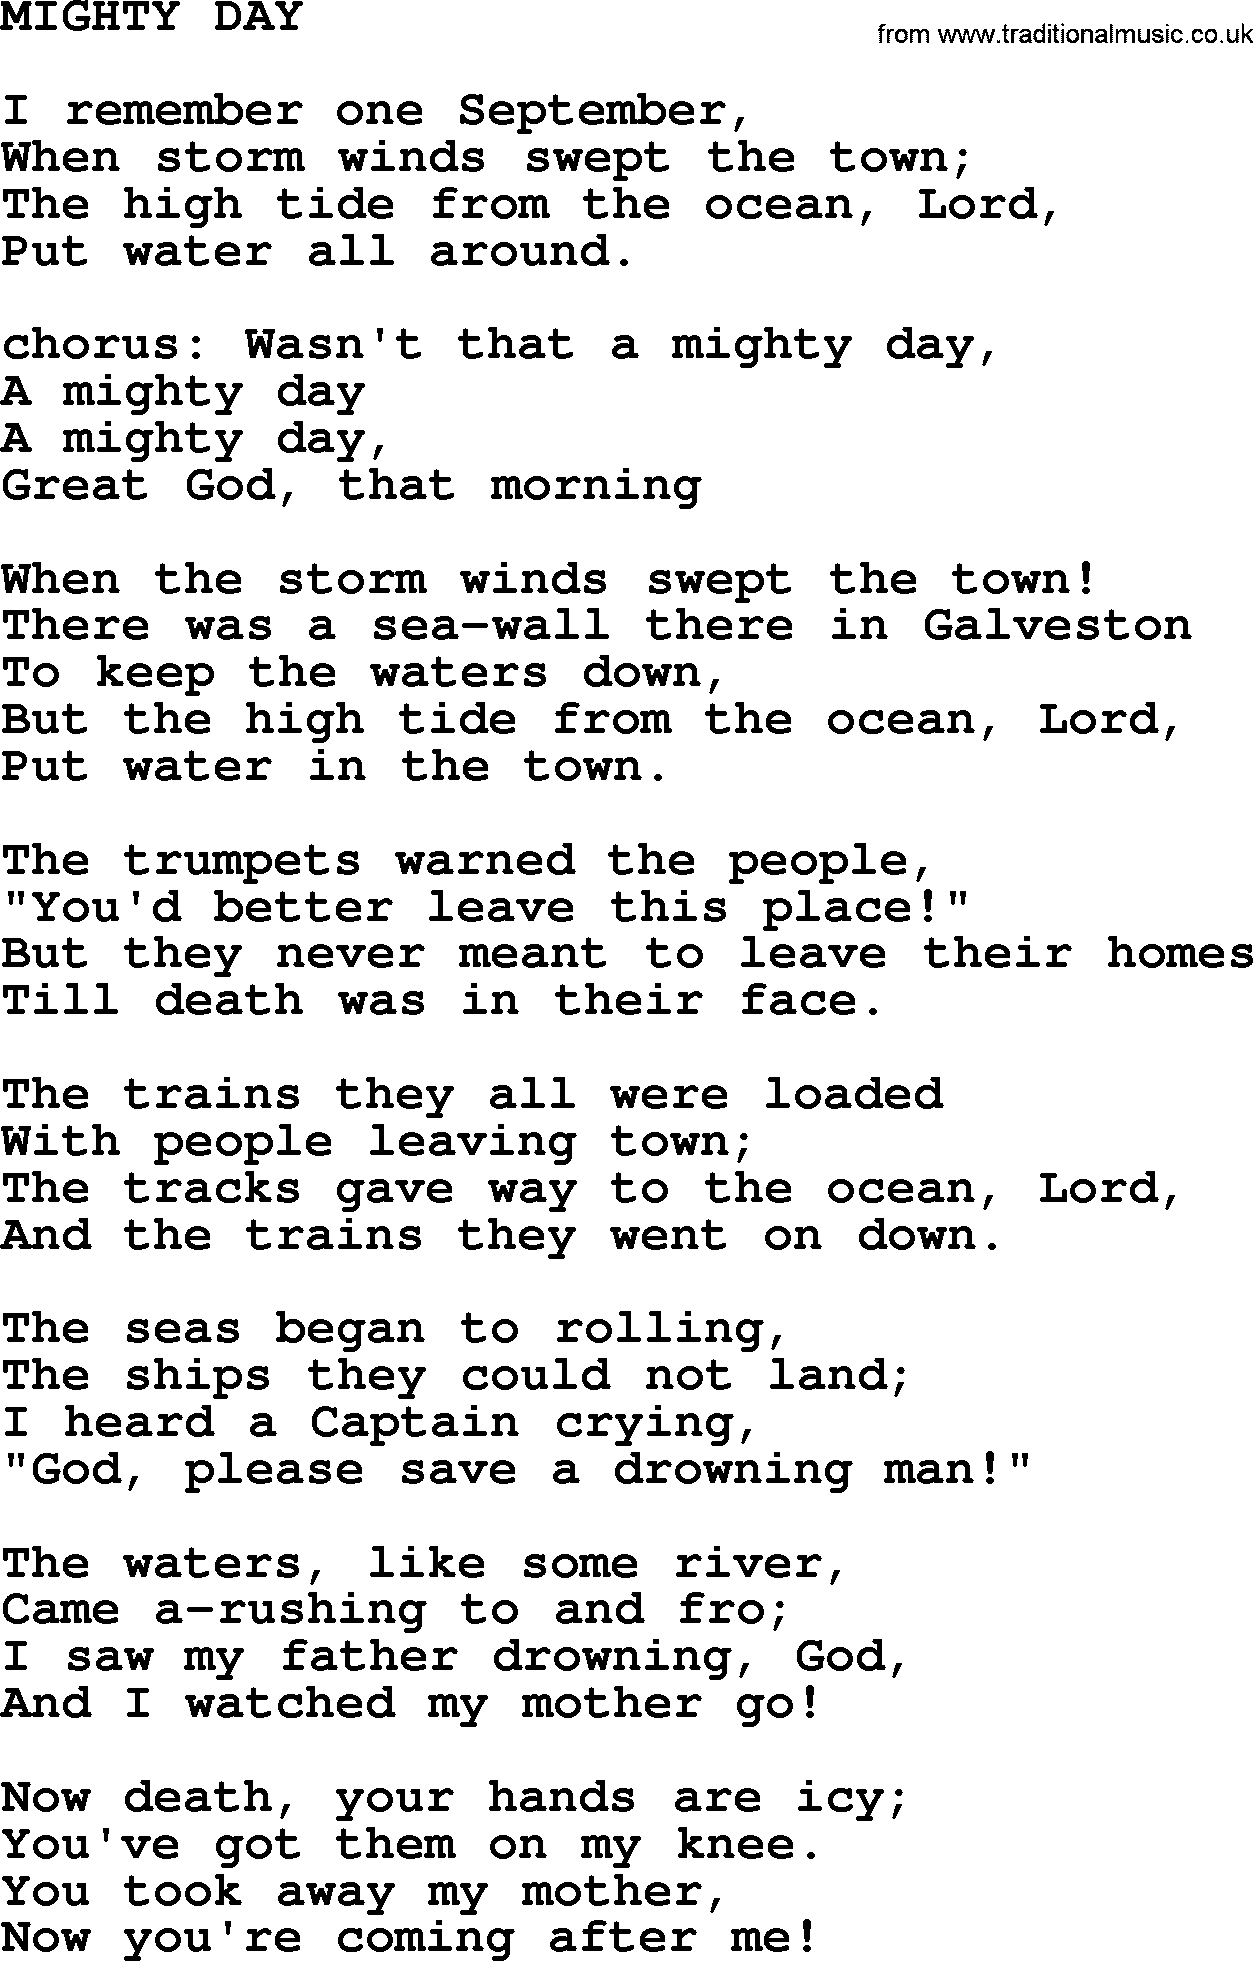 The Byrds song Mighty Day, lyrics